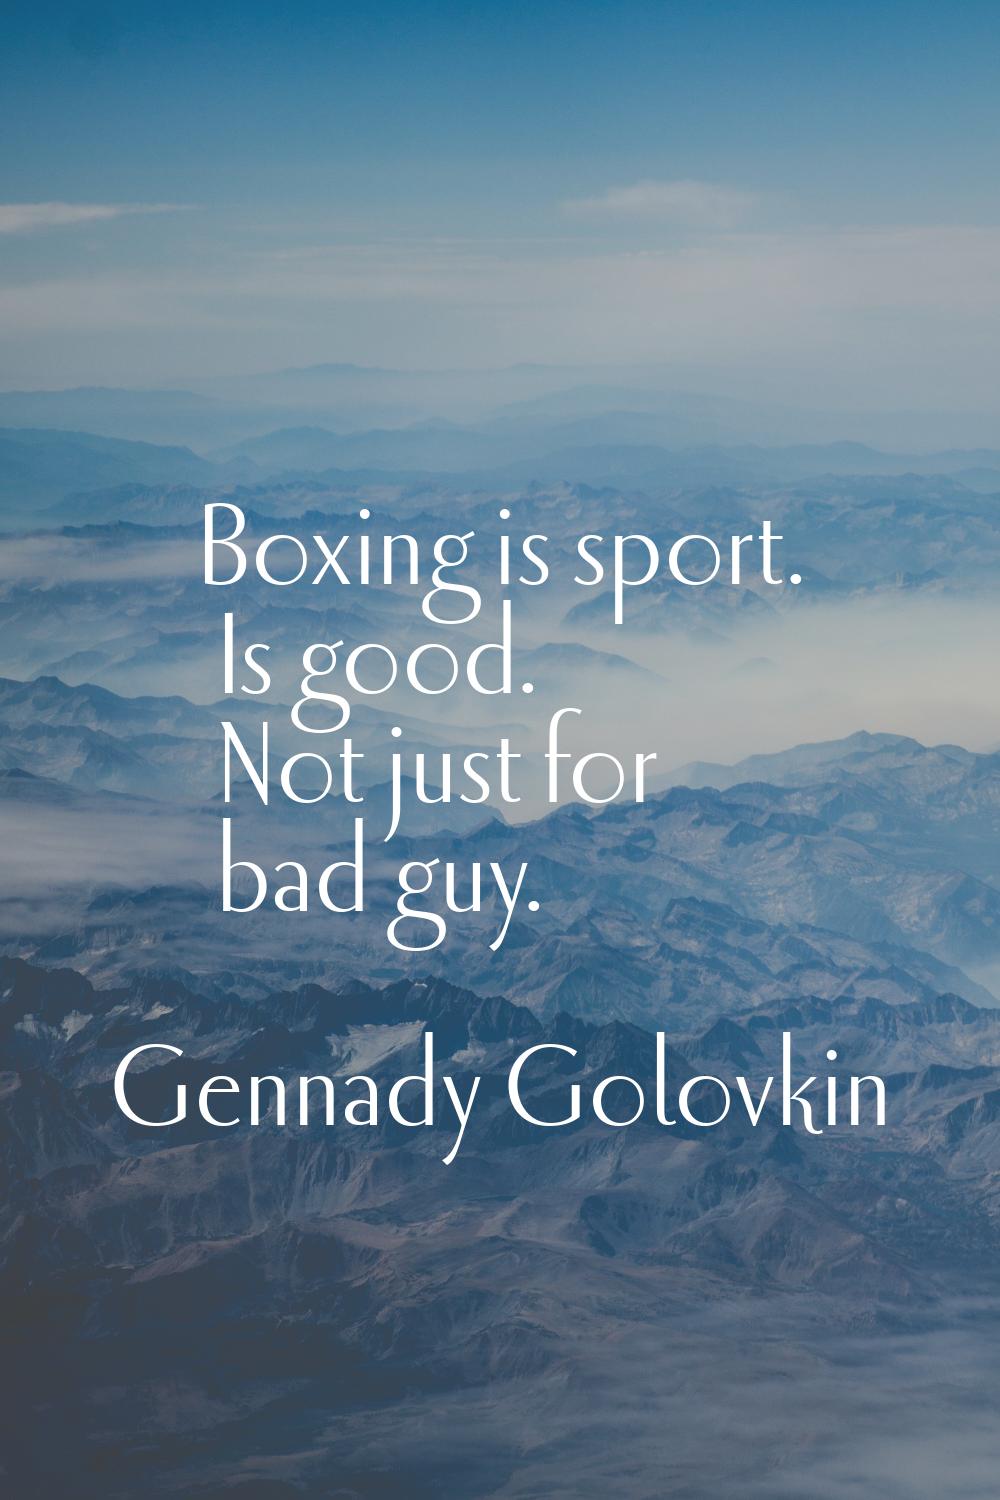 Boxing is sport. Is good. Not just for bad guy.